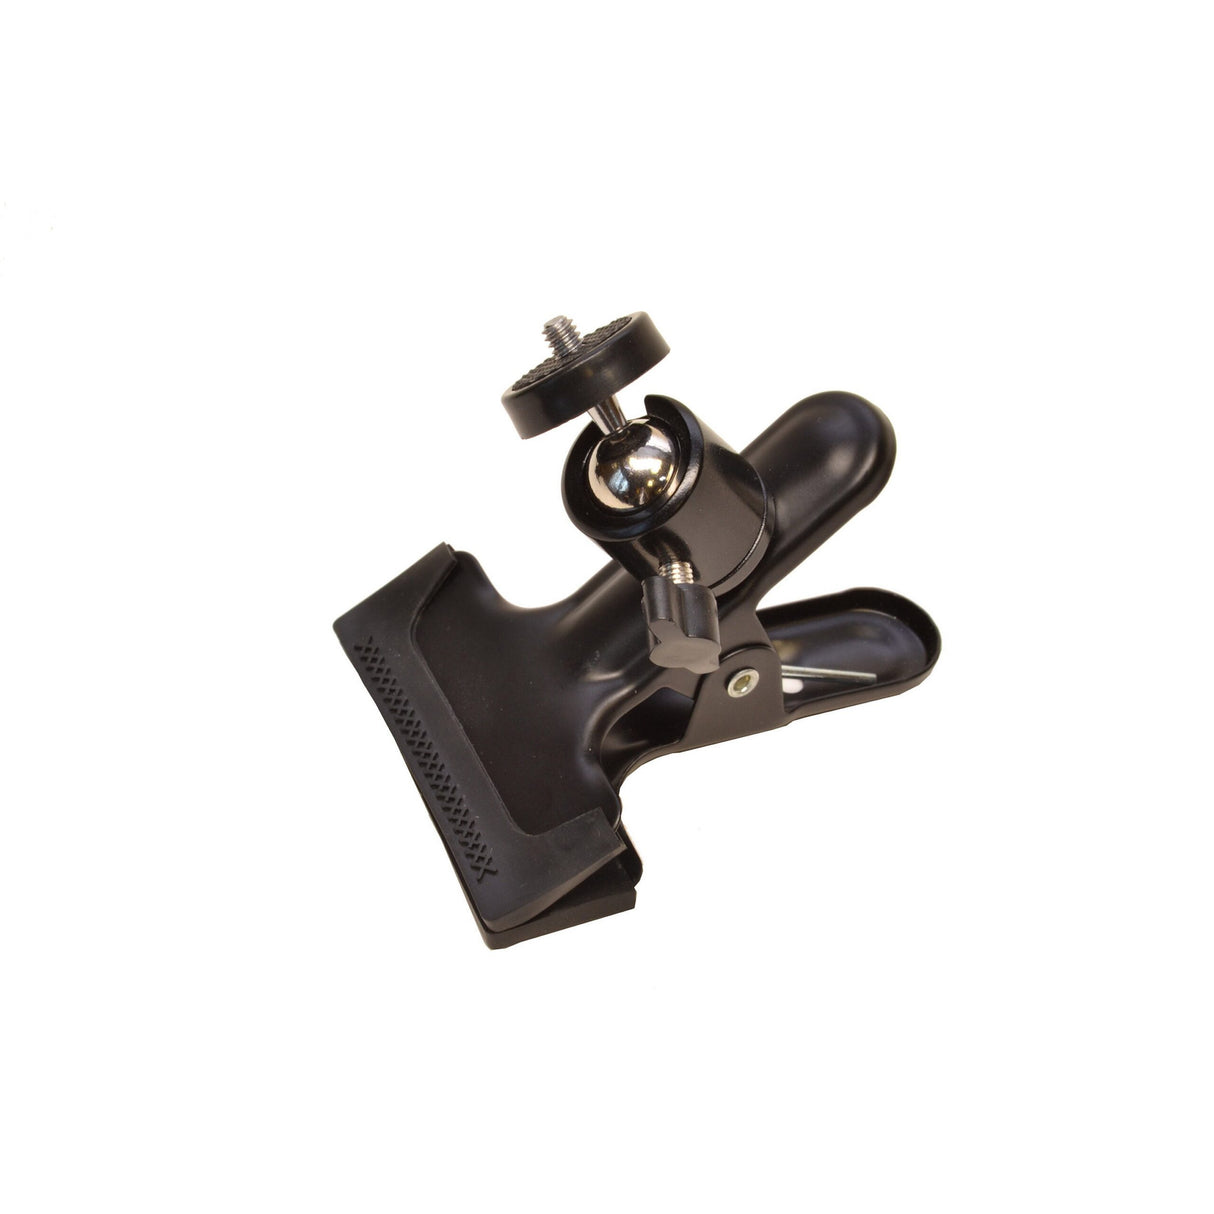 Bescor KLP Clip Clamp with Attached Swivel Ball Mount